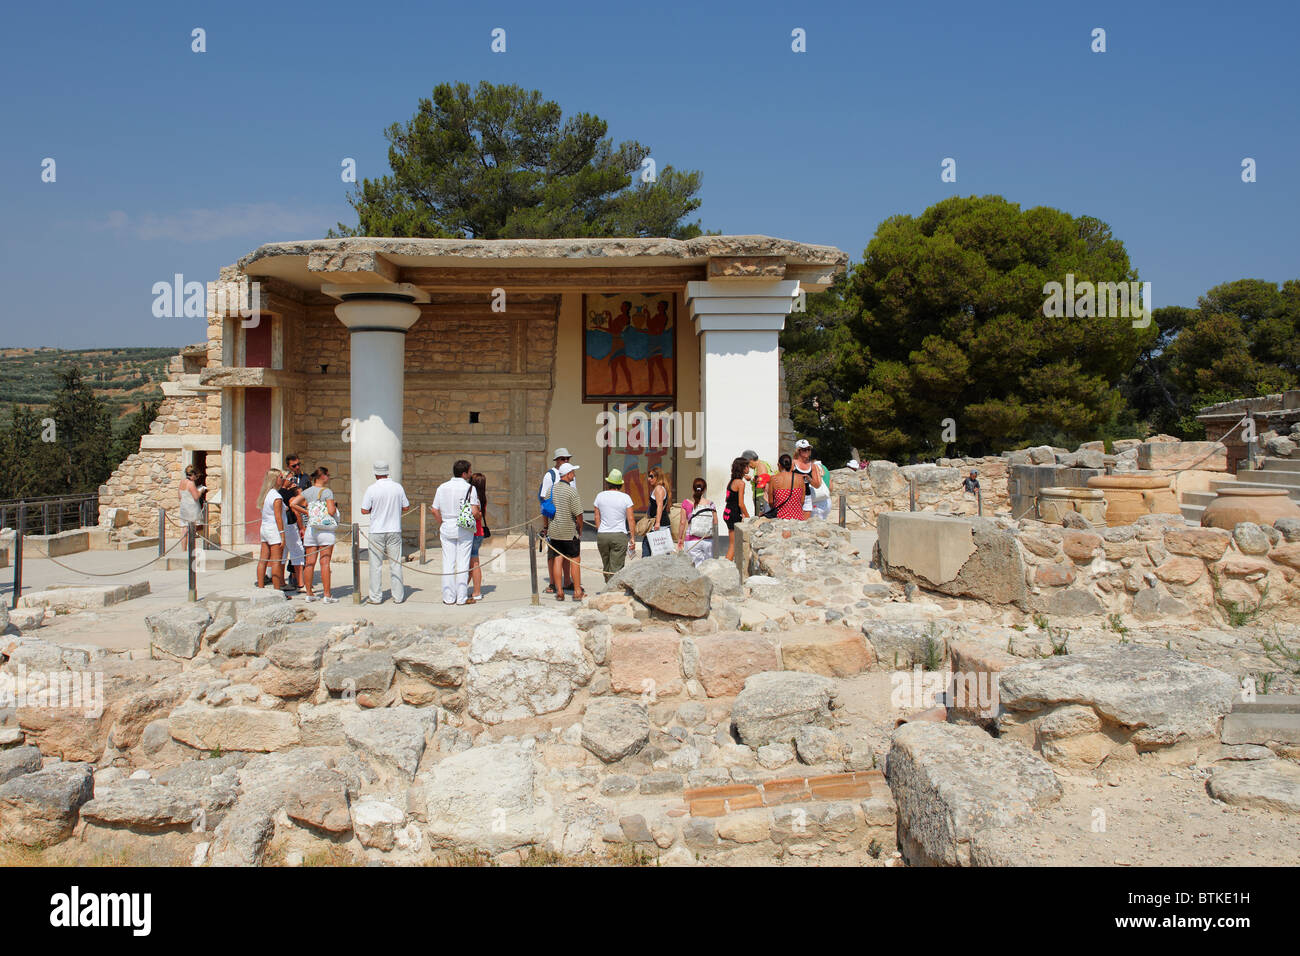 Tourists looking at the famous mural 'Rhyton Bearers' located at the South Propylaeum of the ancient Knossos Palace. Crete, Greece. Stock Photo